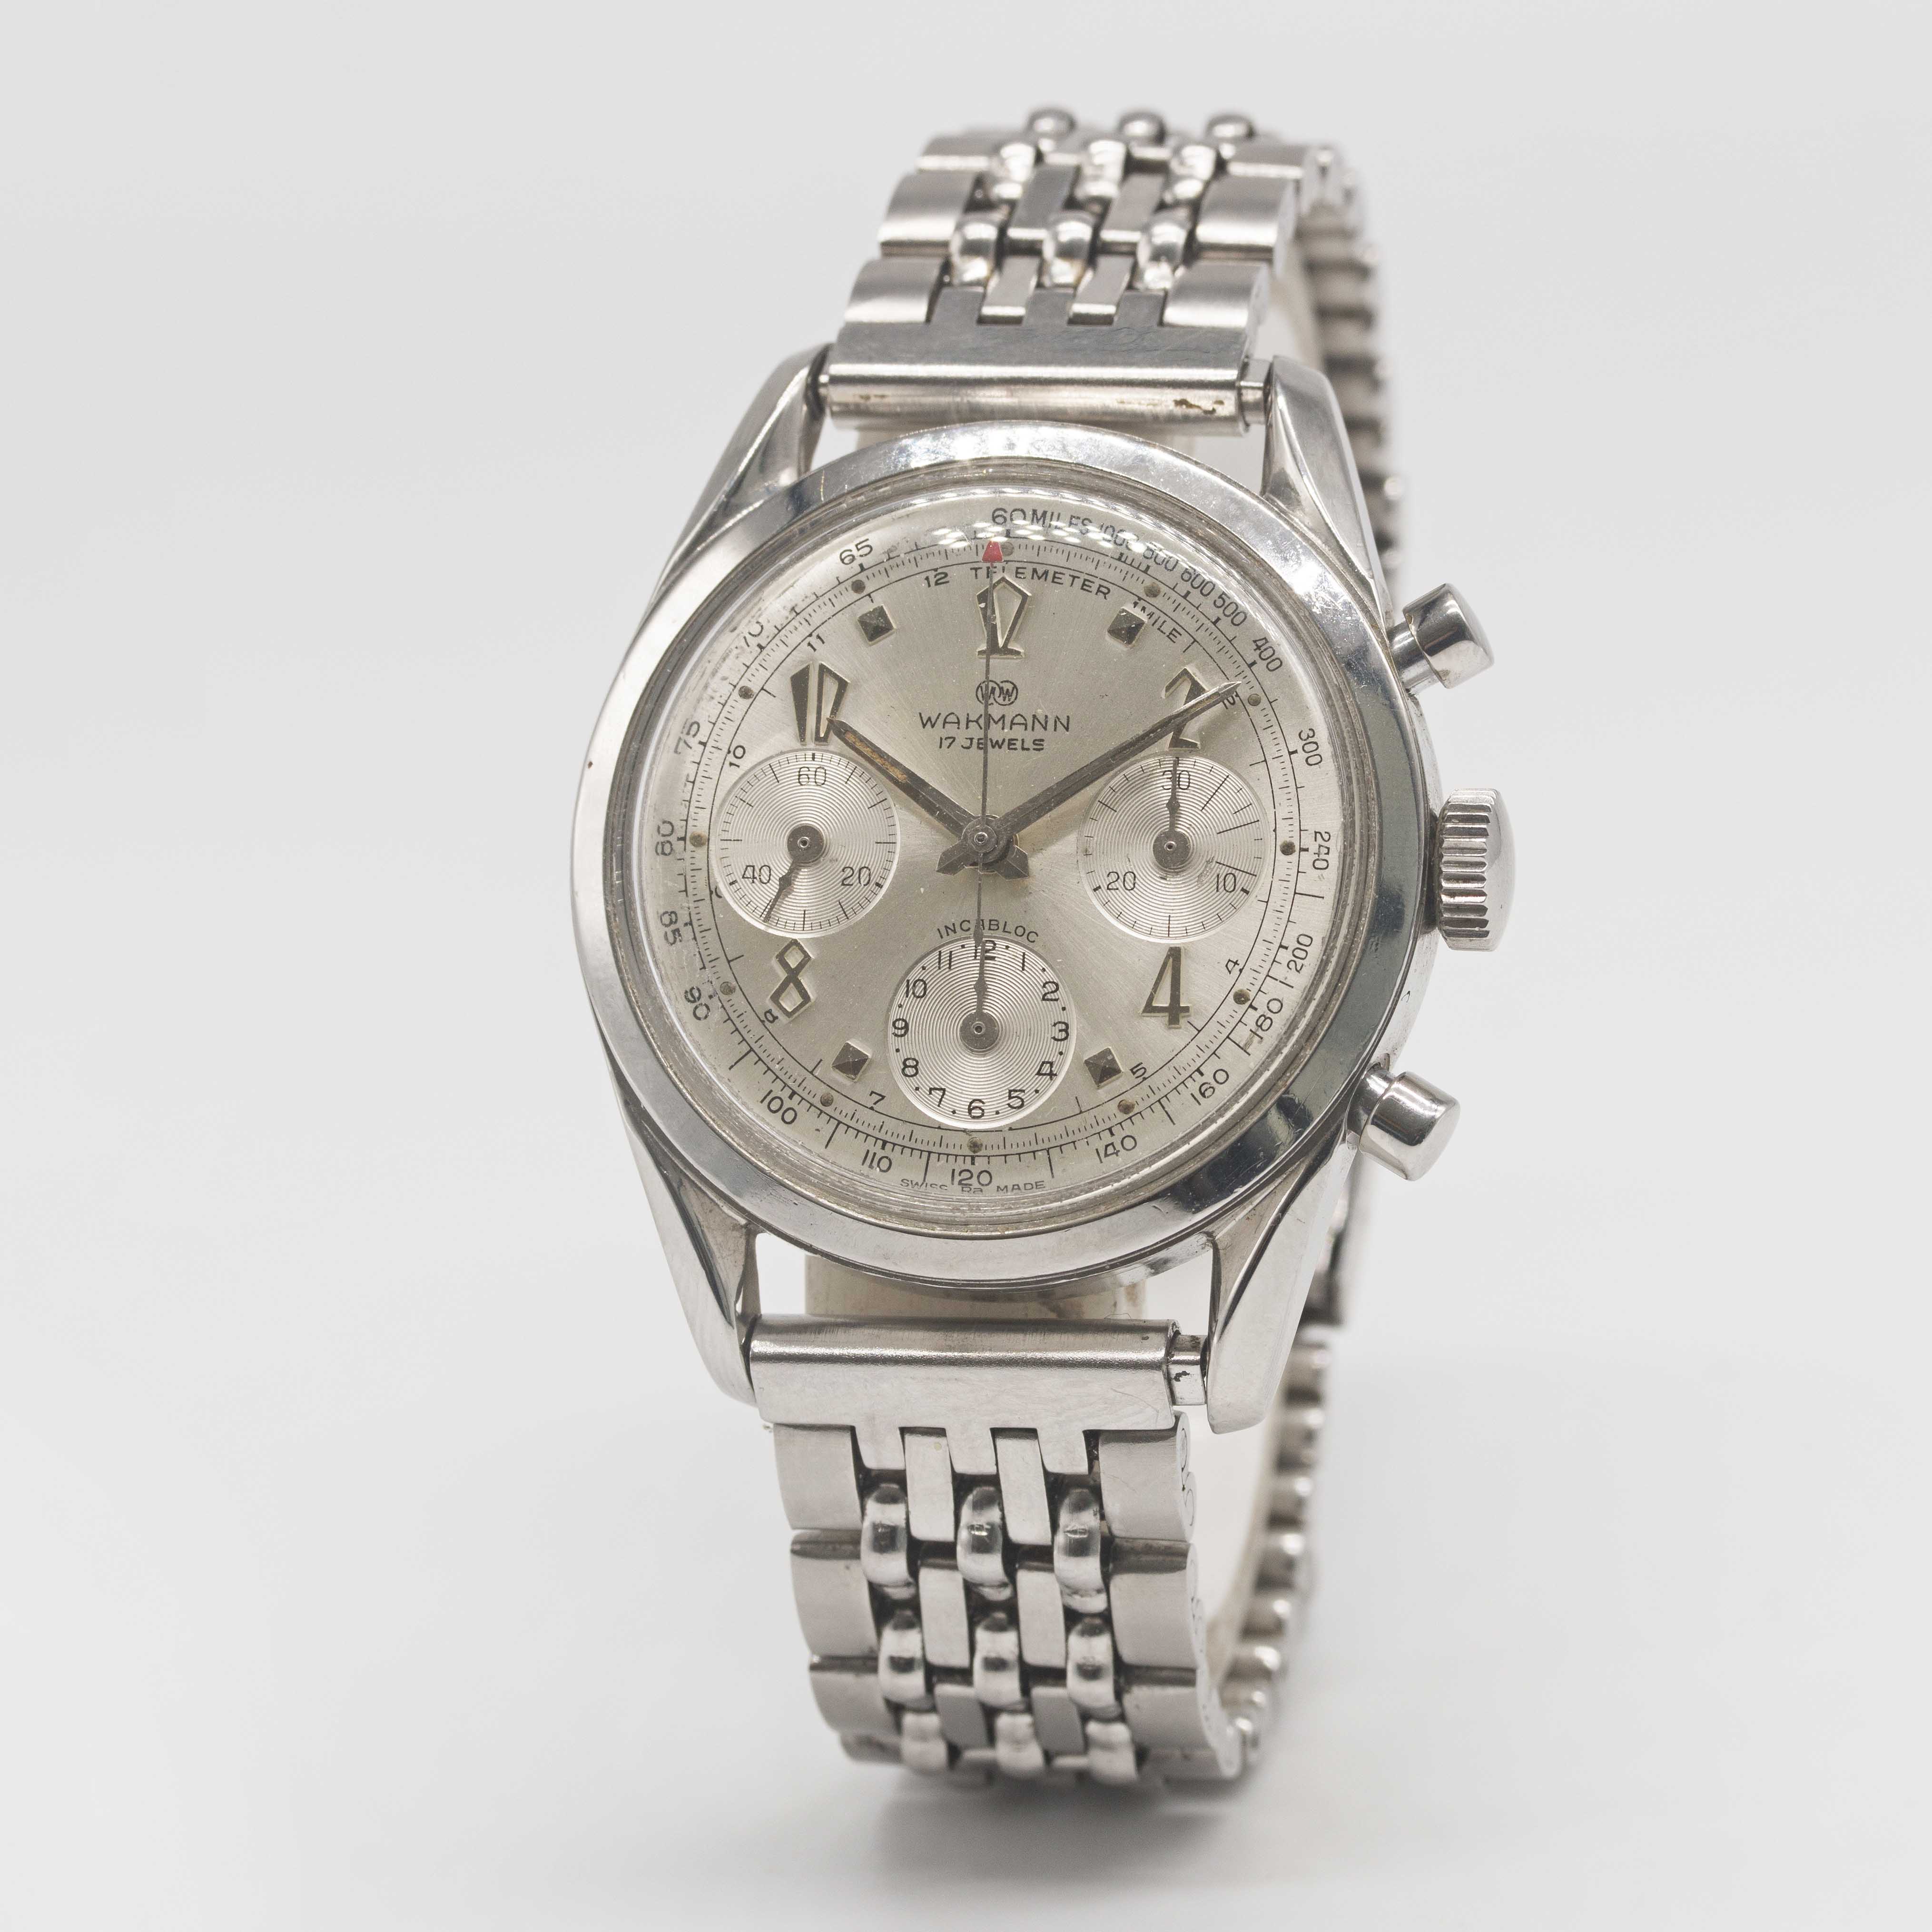 A GENTLEMAN'S STAINLESS STEEL WAKMANN CHRONOGRAPH BRACELET WATCH CIRCA 1960s, WITH "TWISTED" - Image 3 of 9